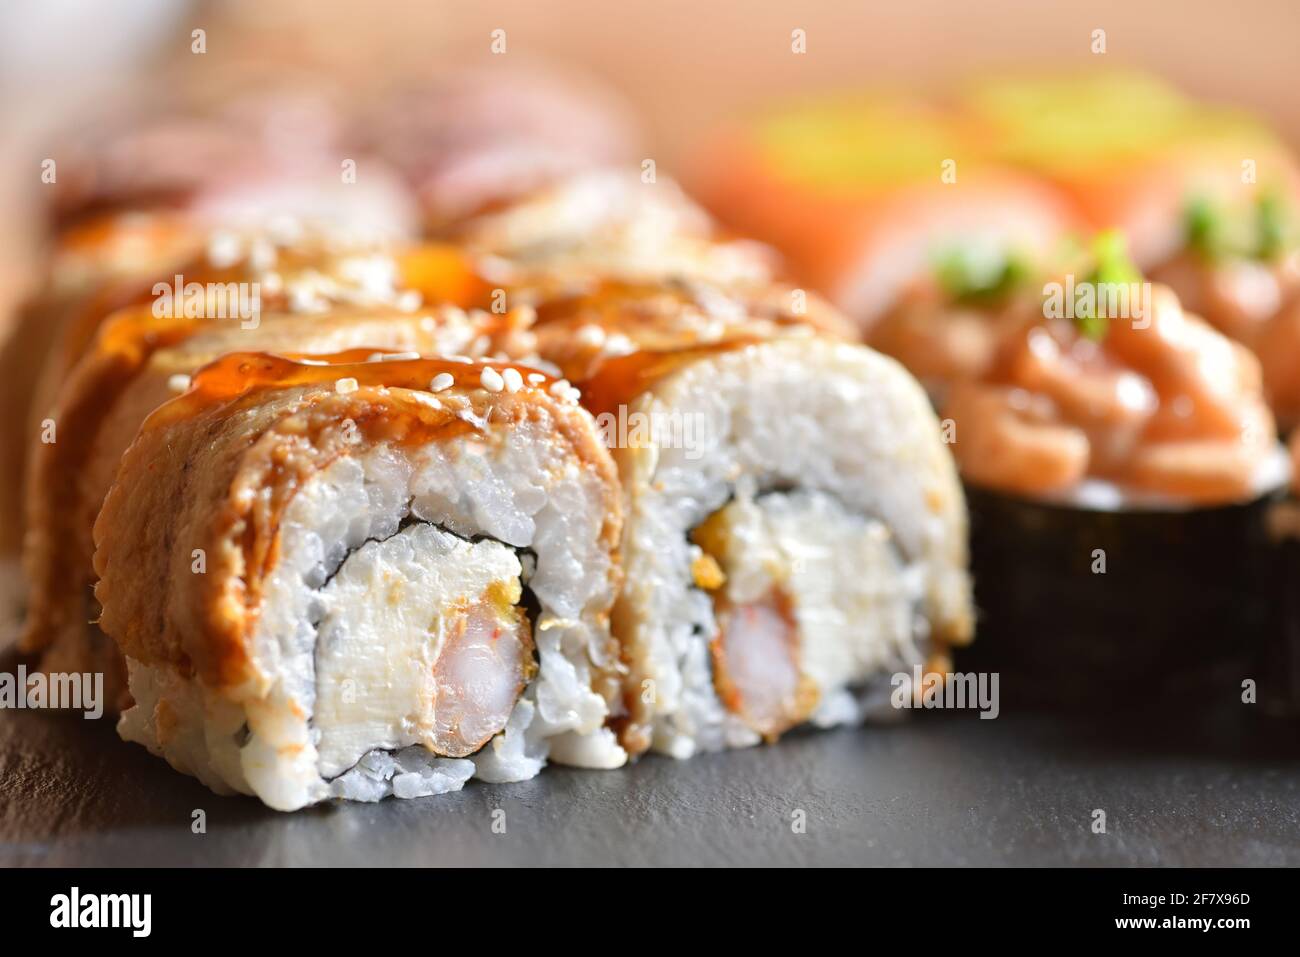 Appetitliche Sushi-Rolle mit Aal Stockfoto